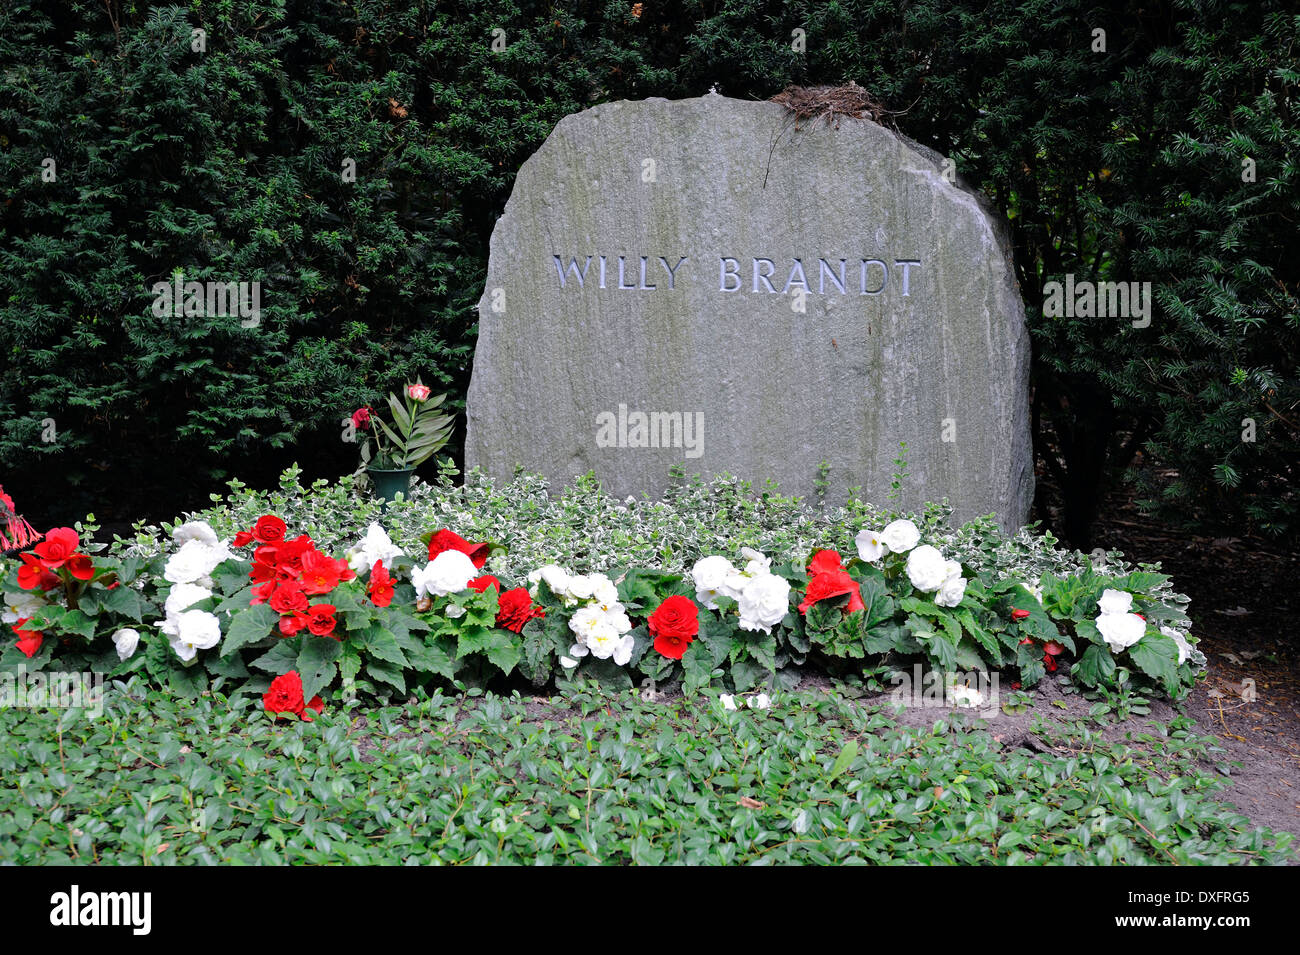 Honorary grave of Willy Brandt, Chancellor, Waldfriedhof Zehlendorf cemetery, Berlin, Germany Stock Photo